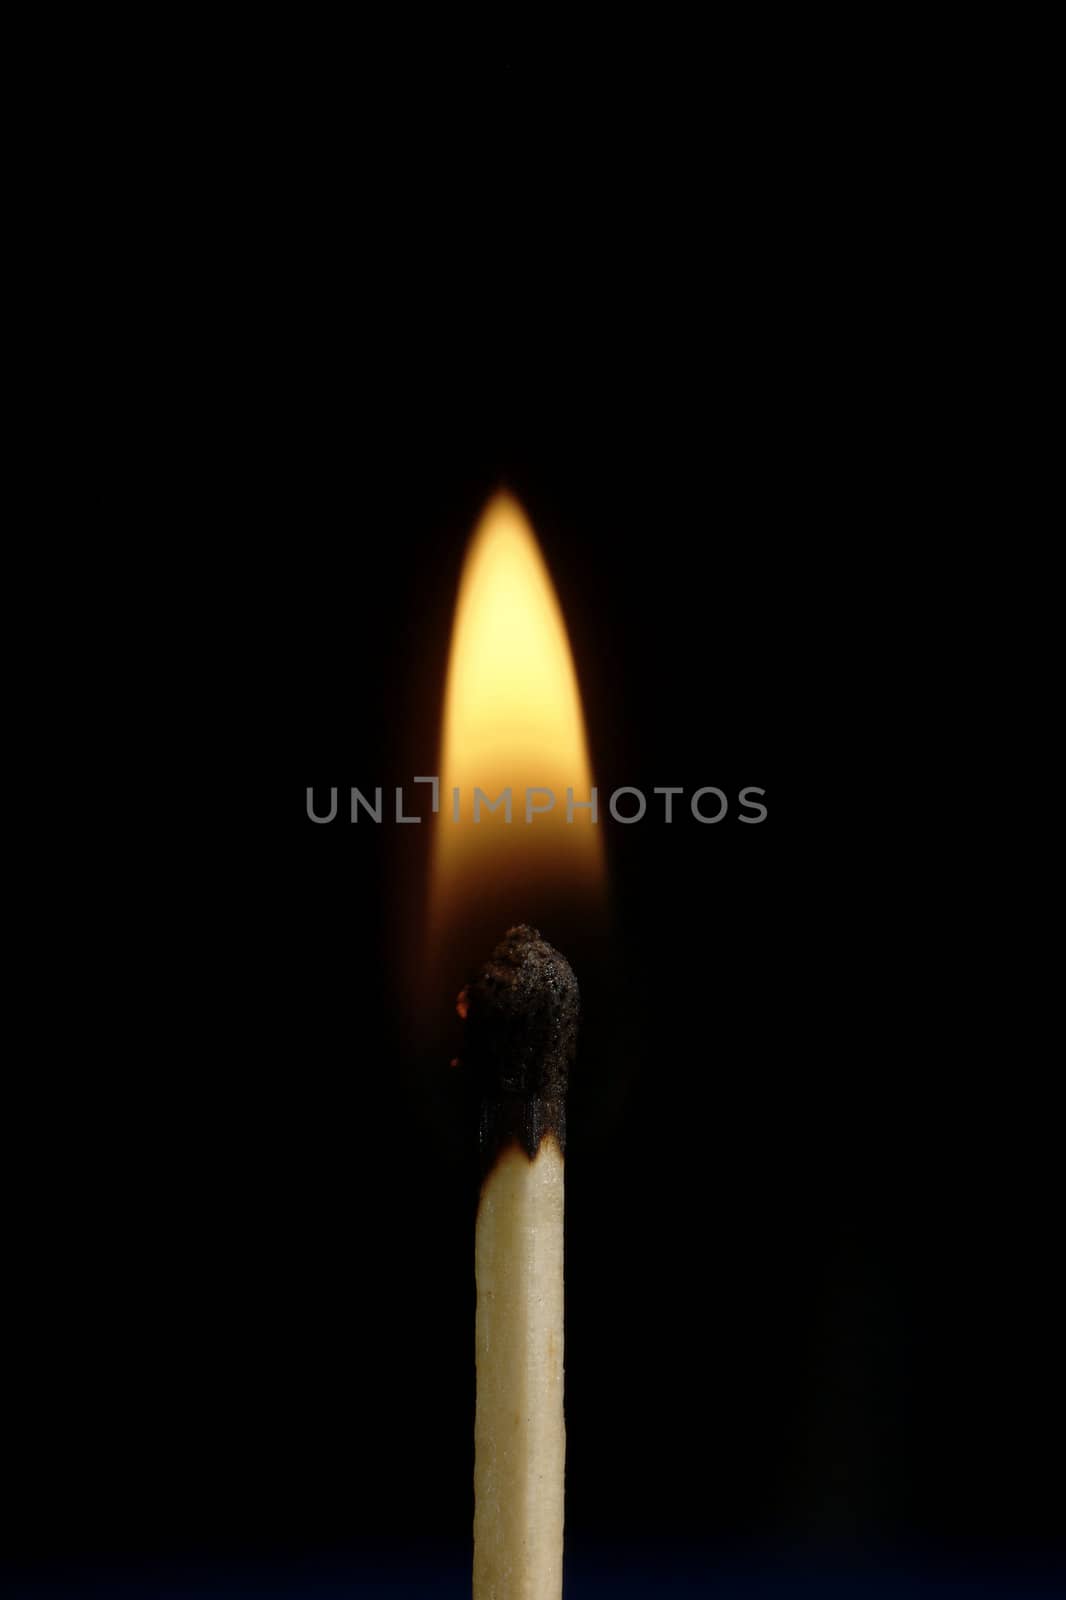 A burning match against a black background.